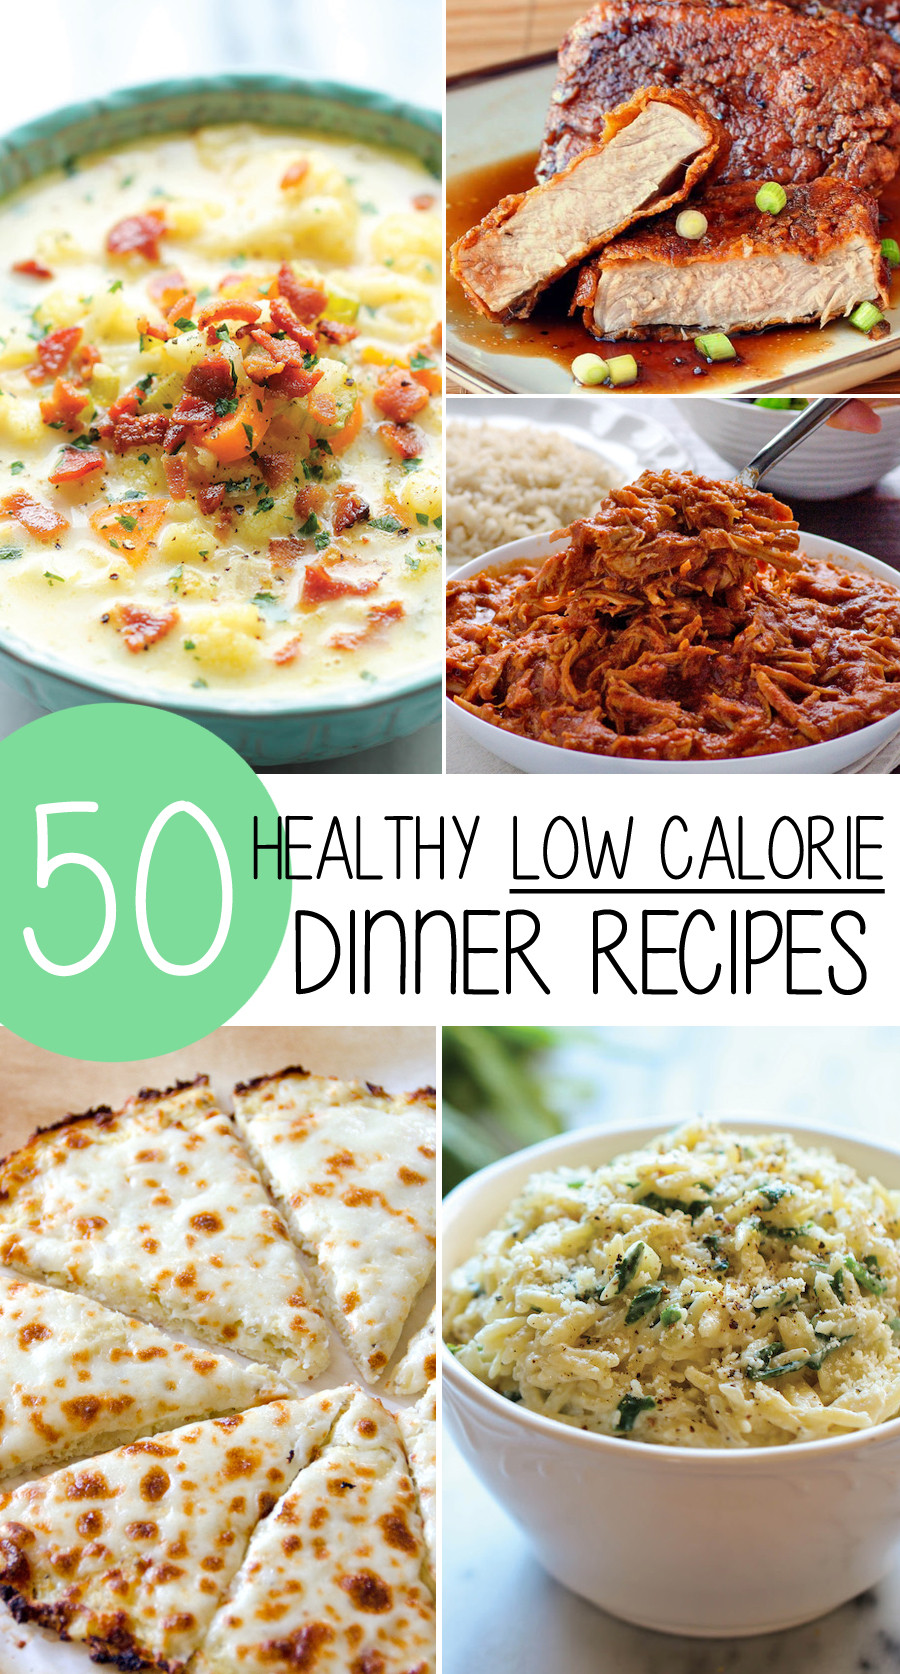 Weight Loss Food Recipes
 50 Healthy Low Calorie Weight Loss Dinner Recipes